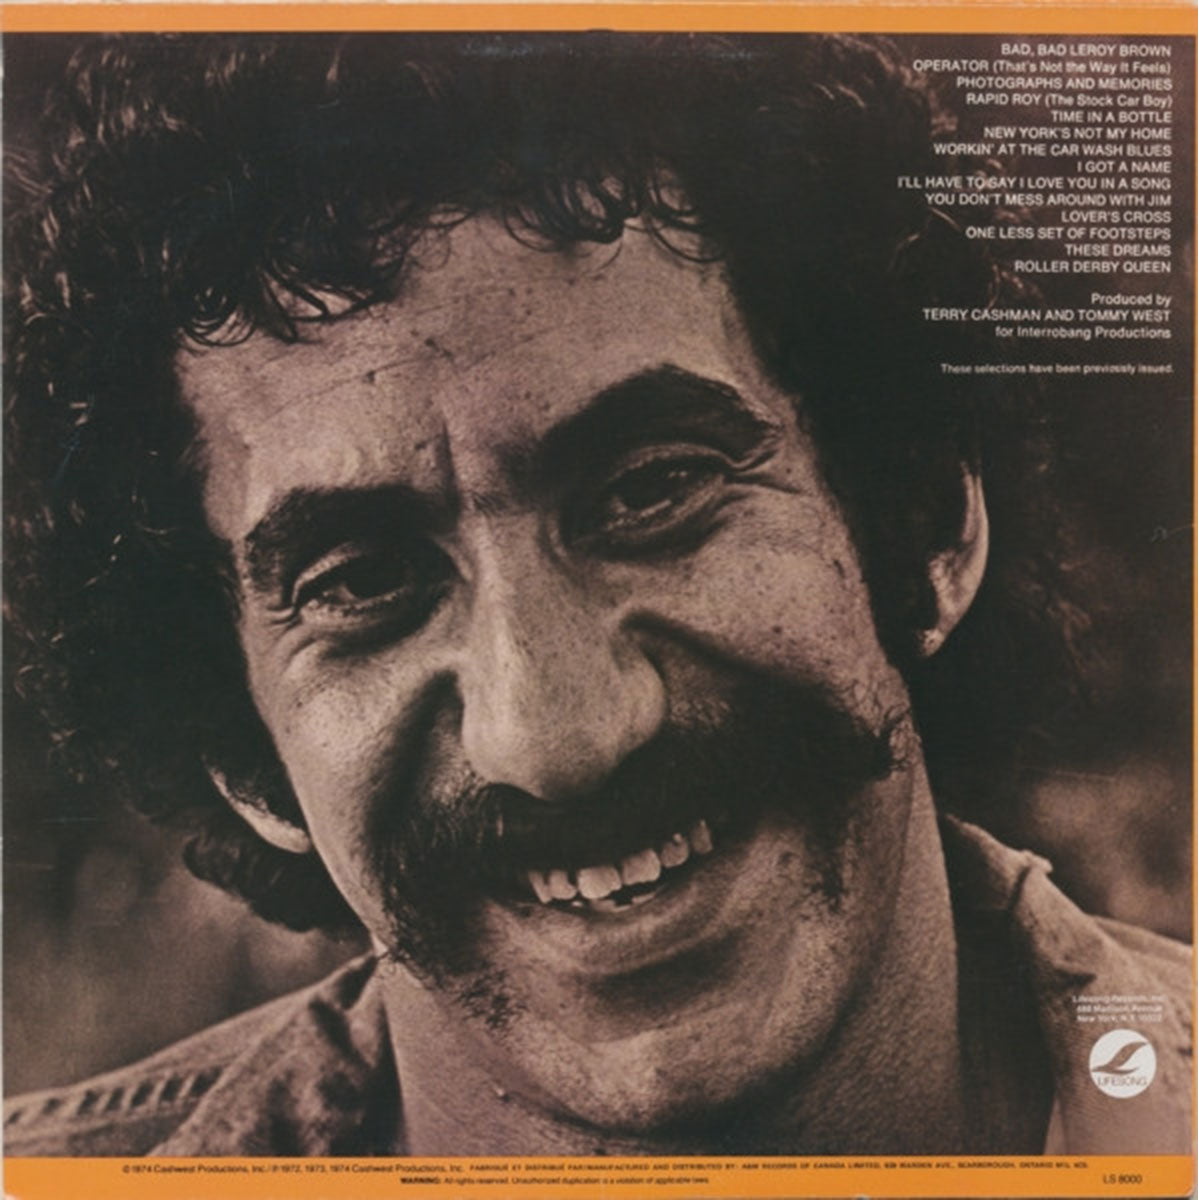 Jim Croce – Photographs And Memories His Greatest Hits